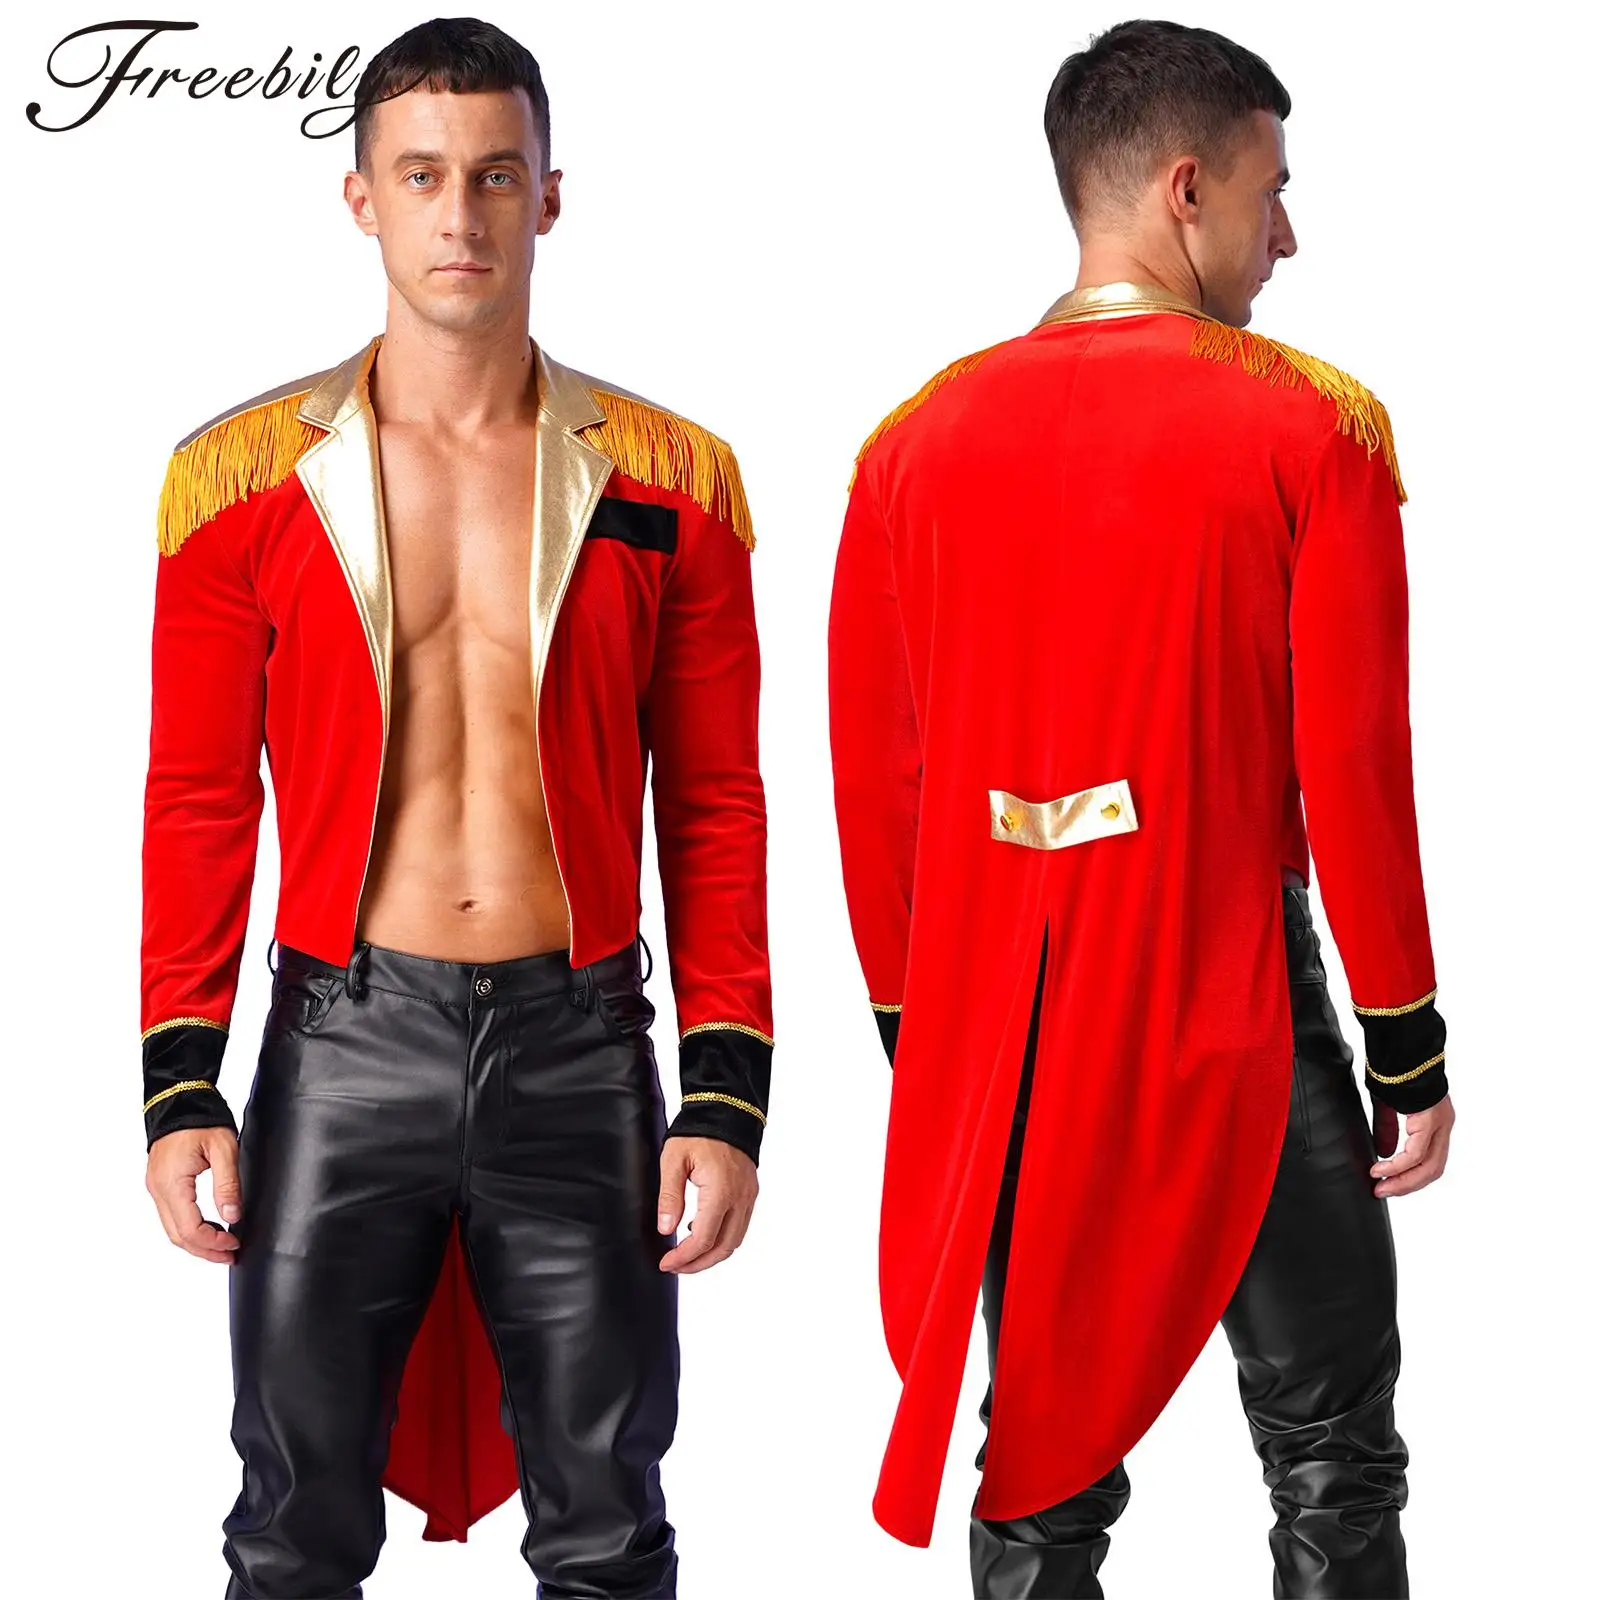 

Mens Circus Ringmaster Showman Cosplay Performance Costume Long Sleeve Metallic Lapel Jacket Tailcoat for Halloween Theme Party